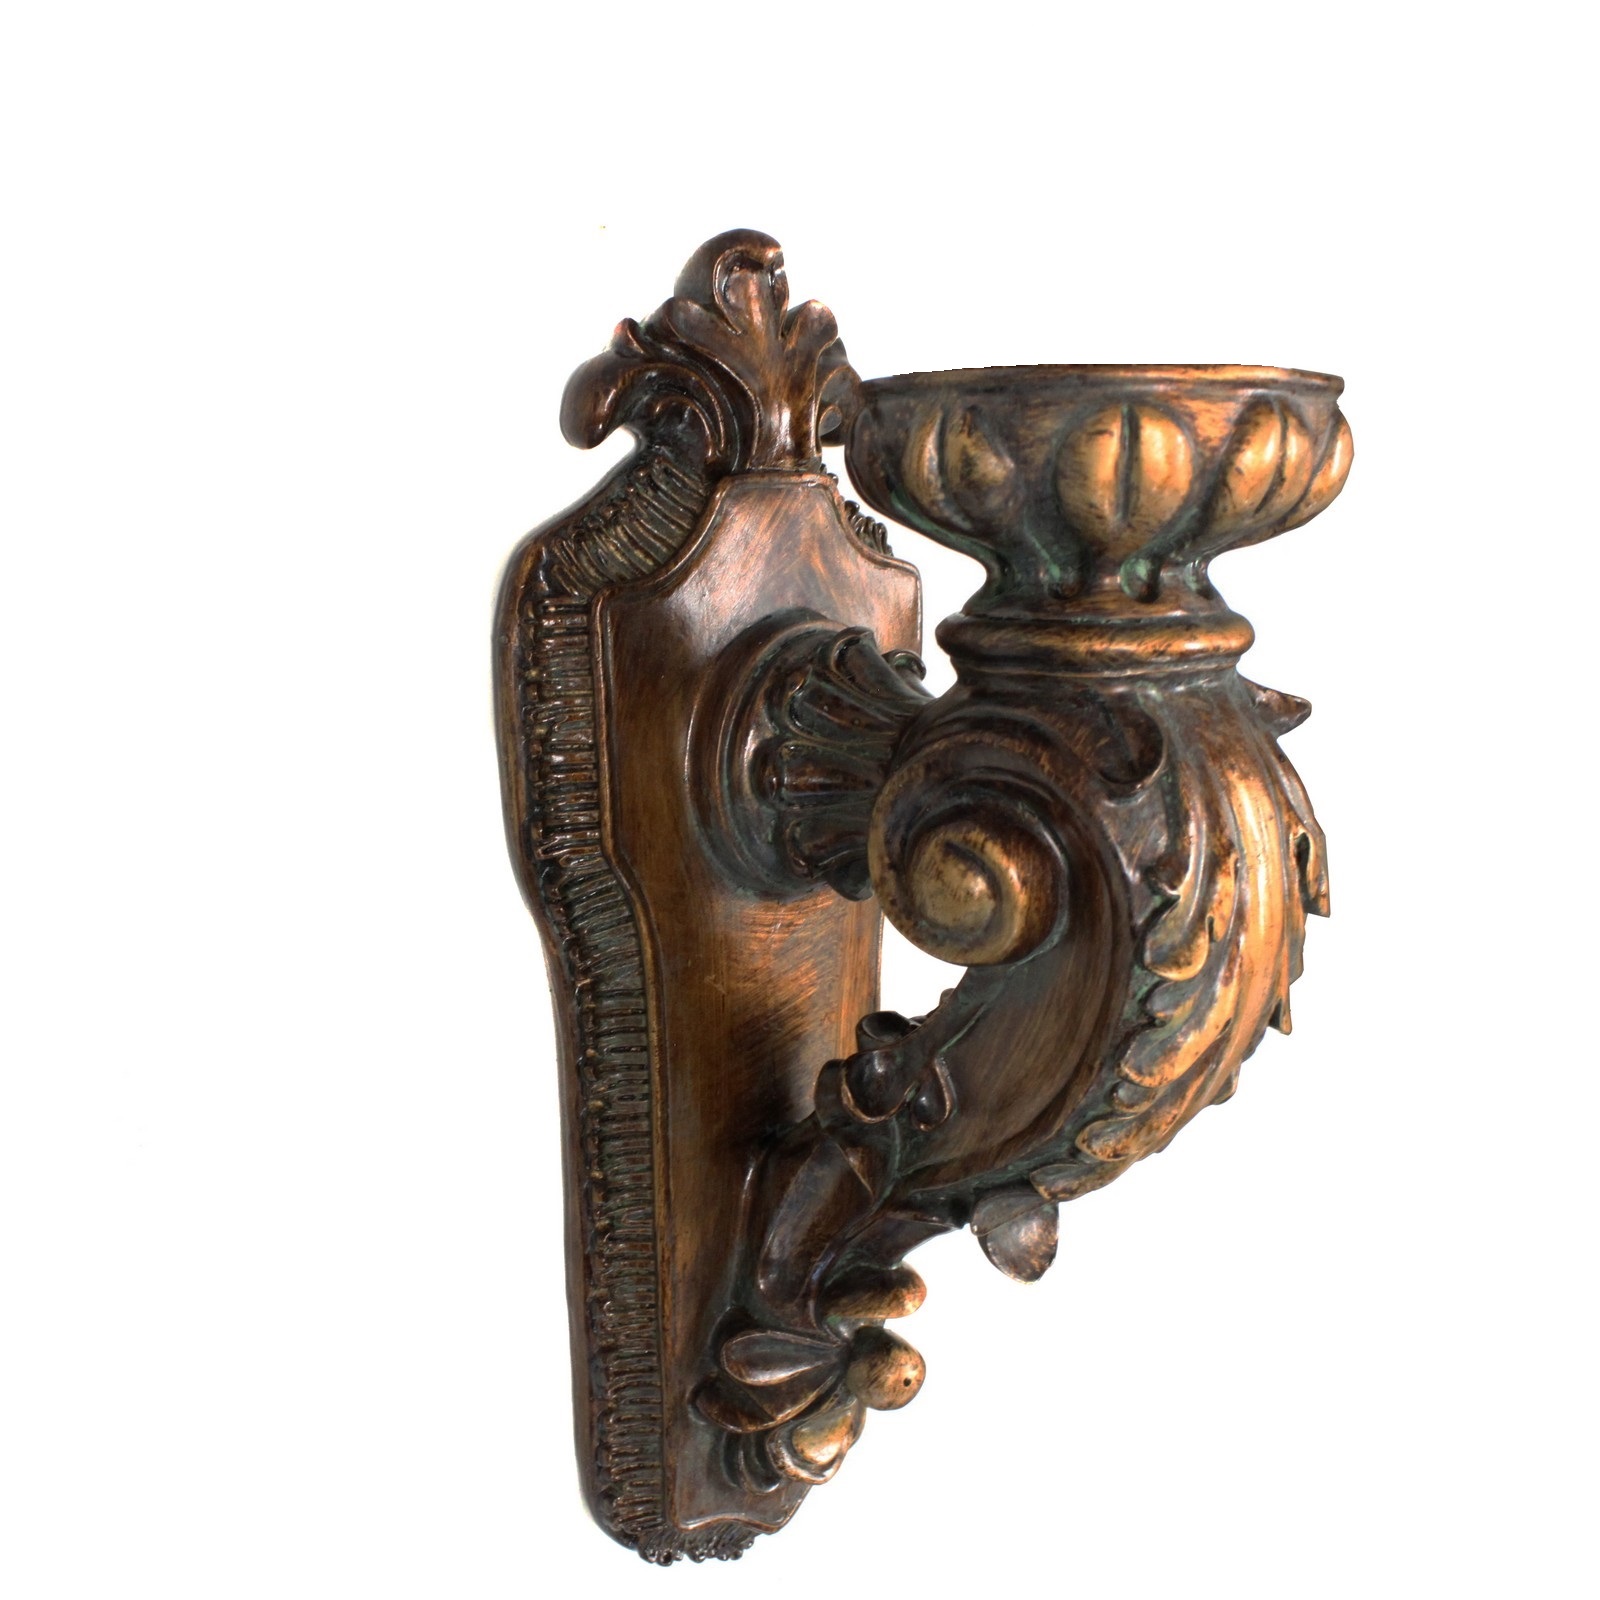 Urban Designs Antique Replica Rusted Wall Sconce Candle Holder